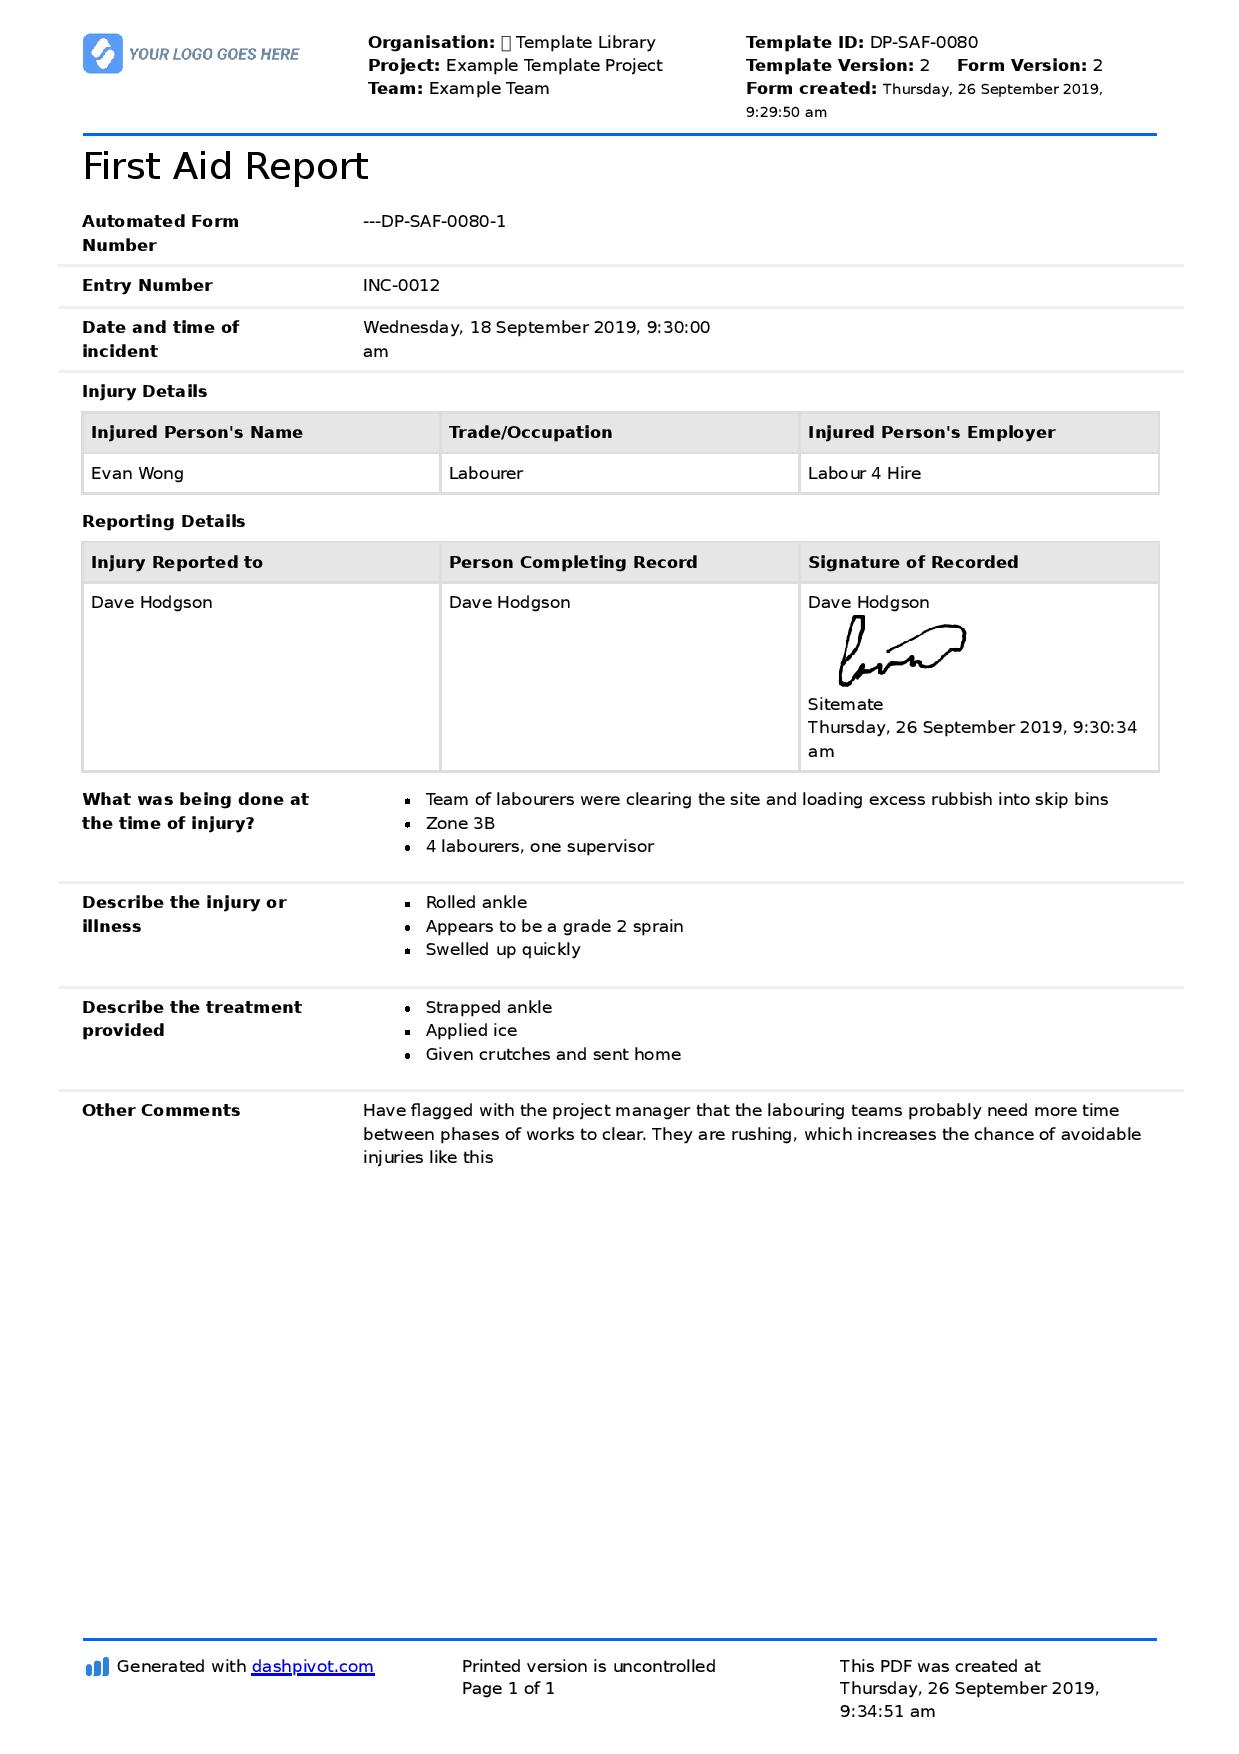 First Aid Report Form Template (Free To Use, Better Than Pdf) Throughout First Aid Incident Report Form Template